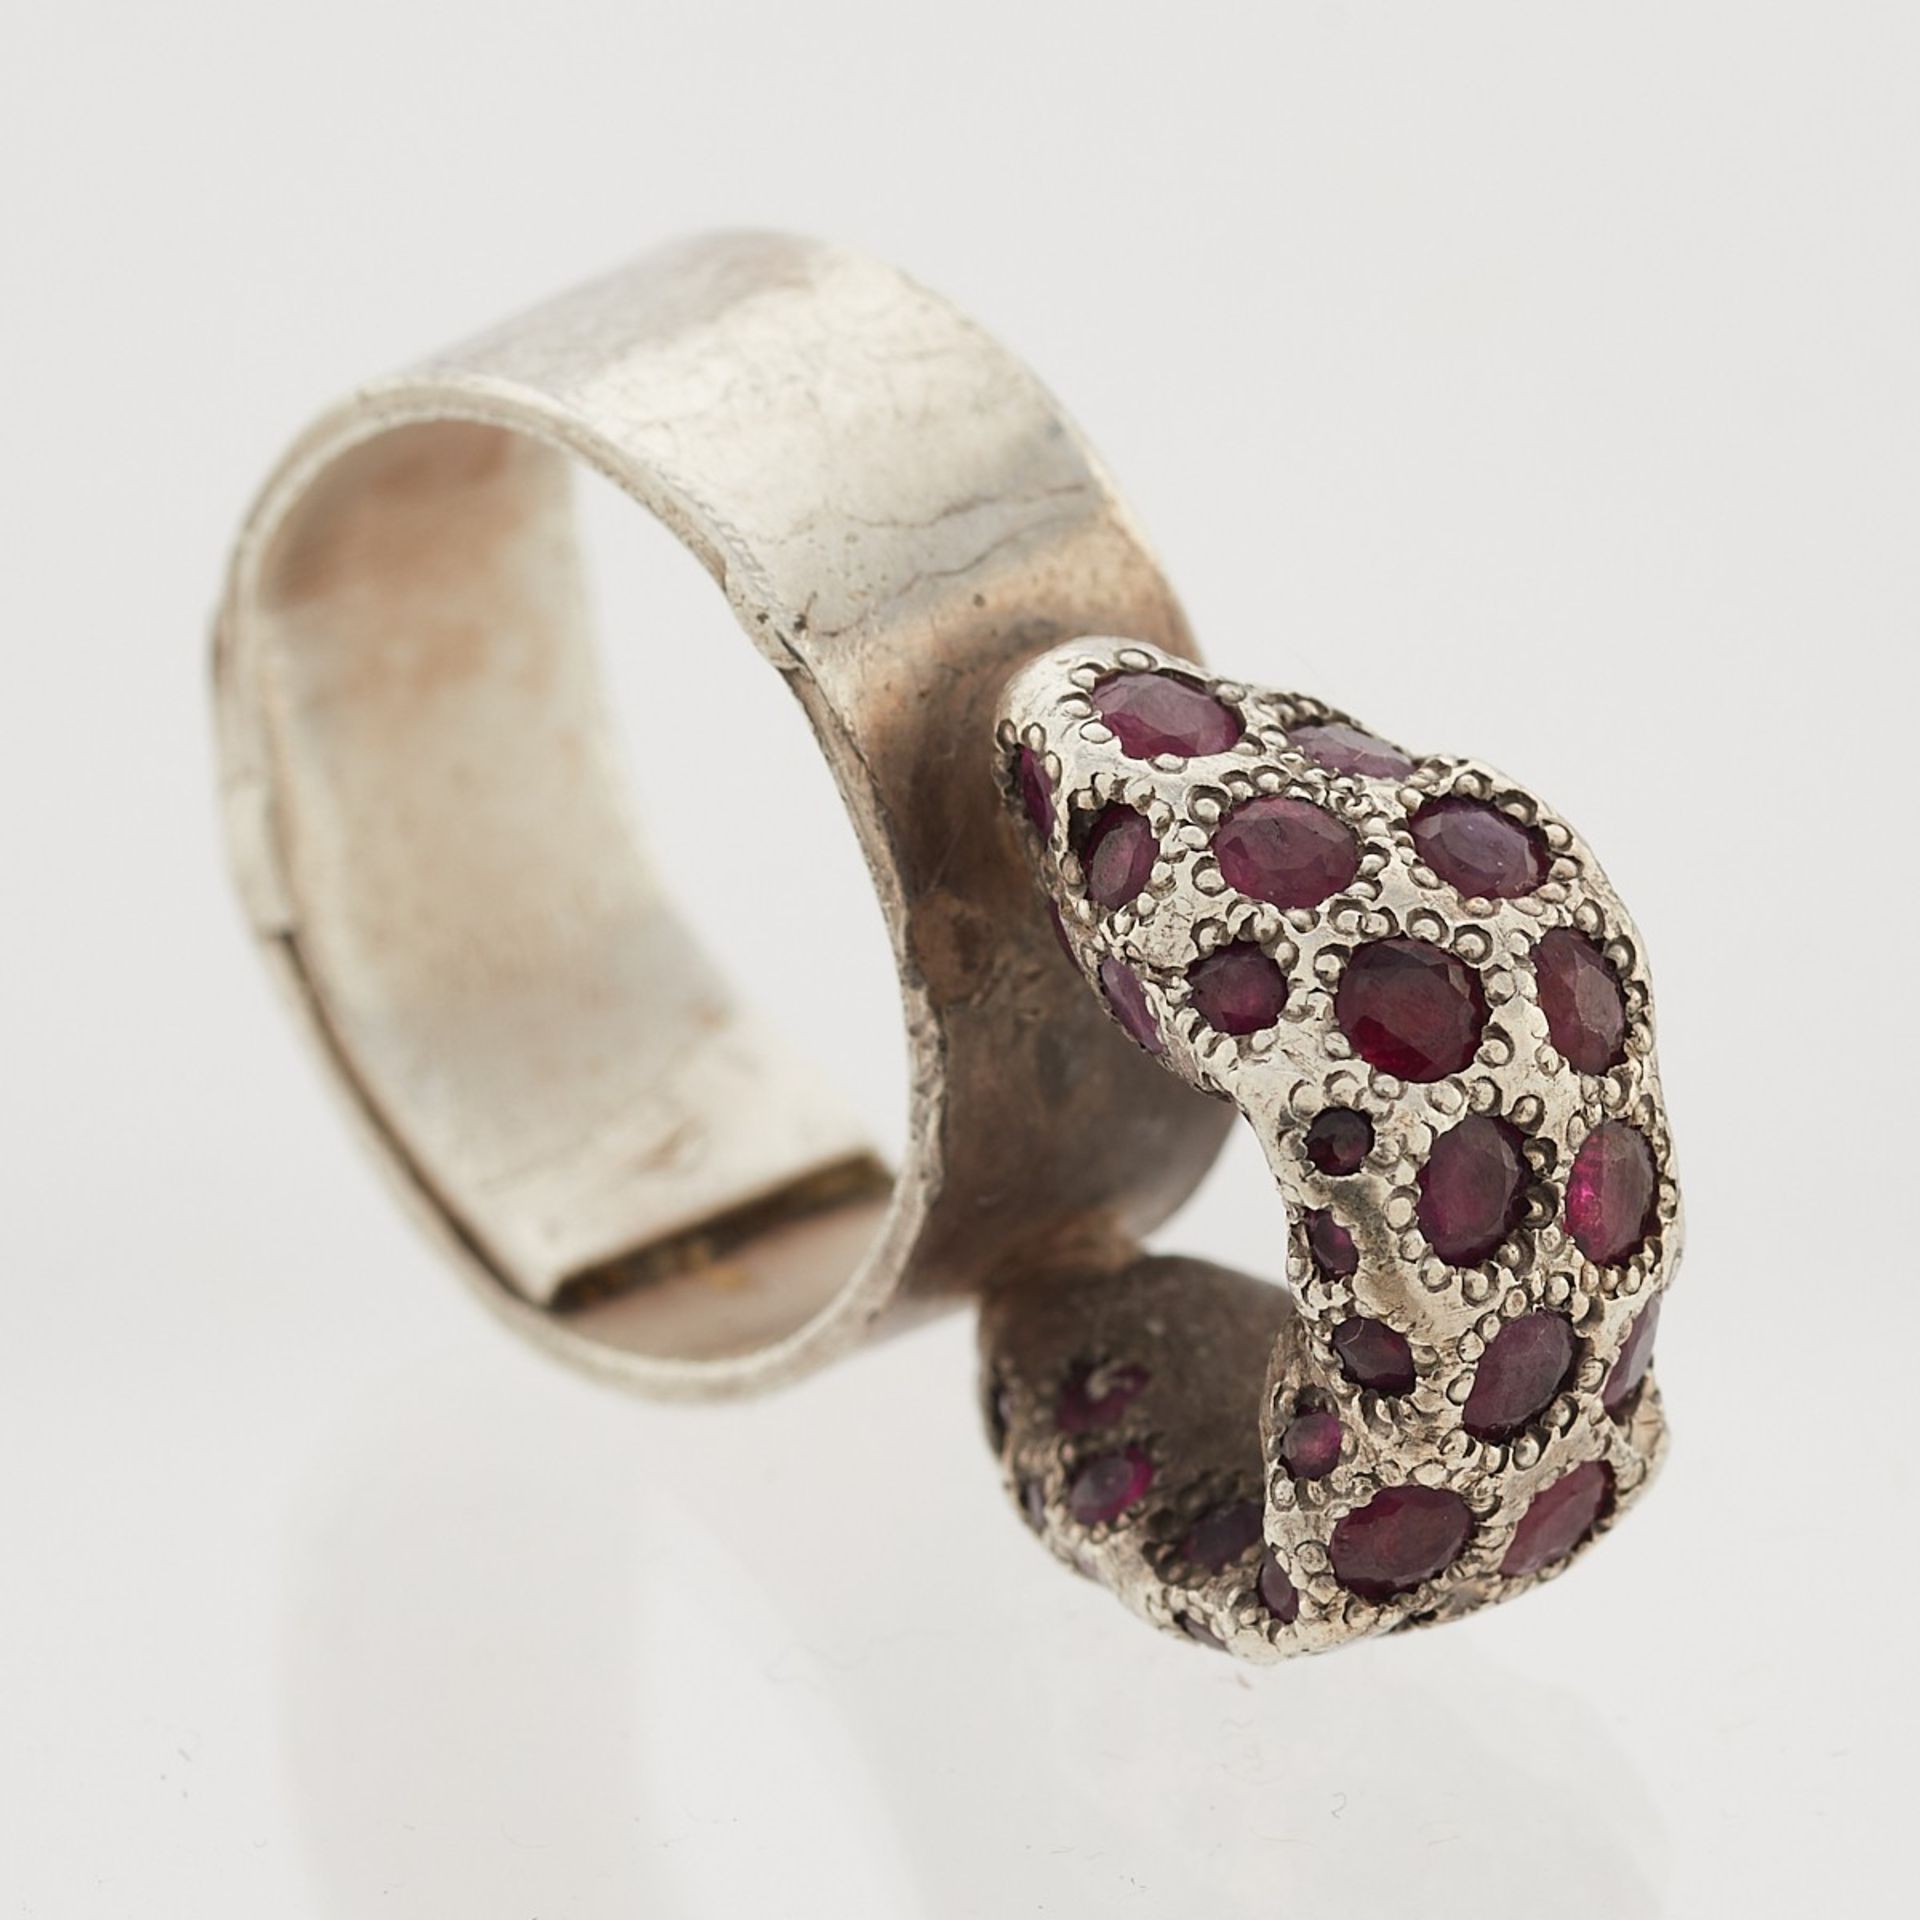 Karl Fritsch Sterling Silver & Ruby Ring - Image 6 of 7